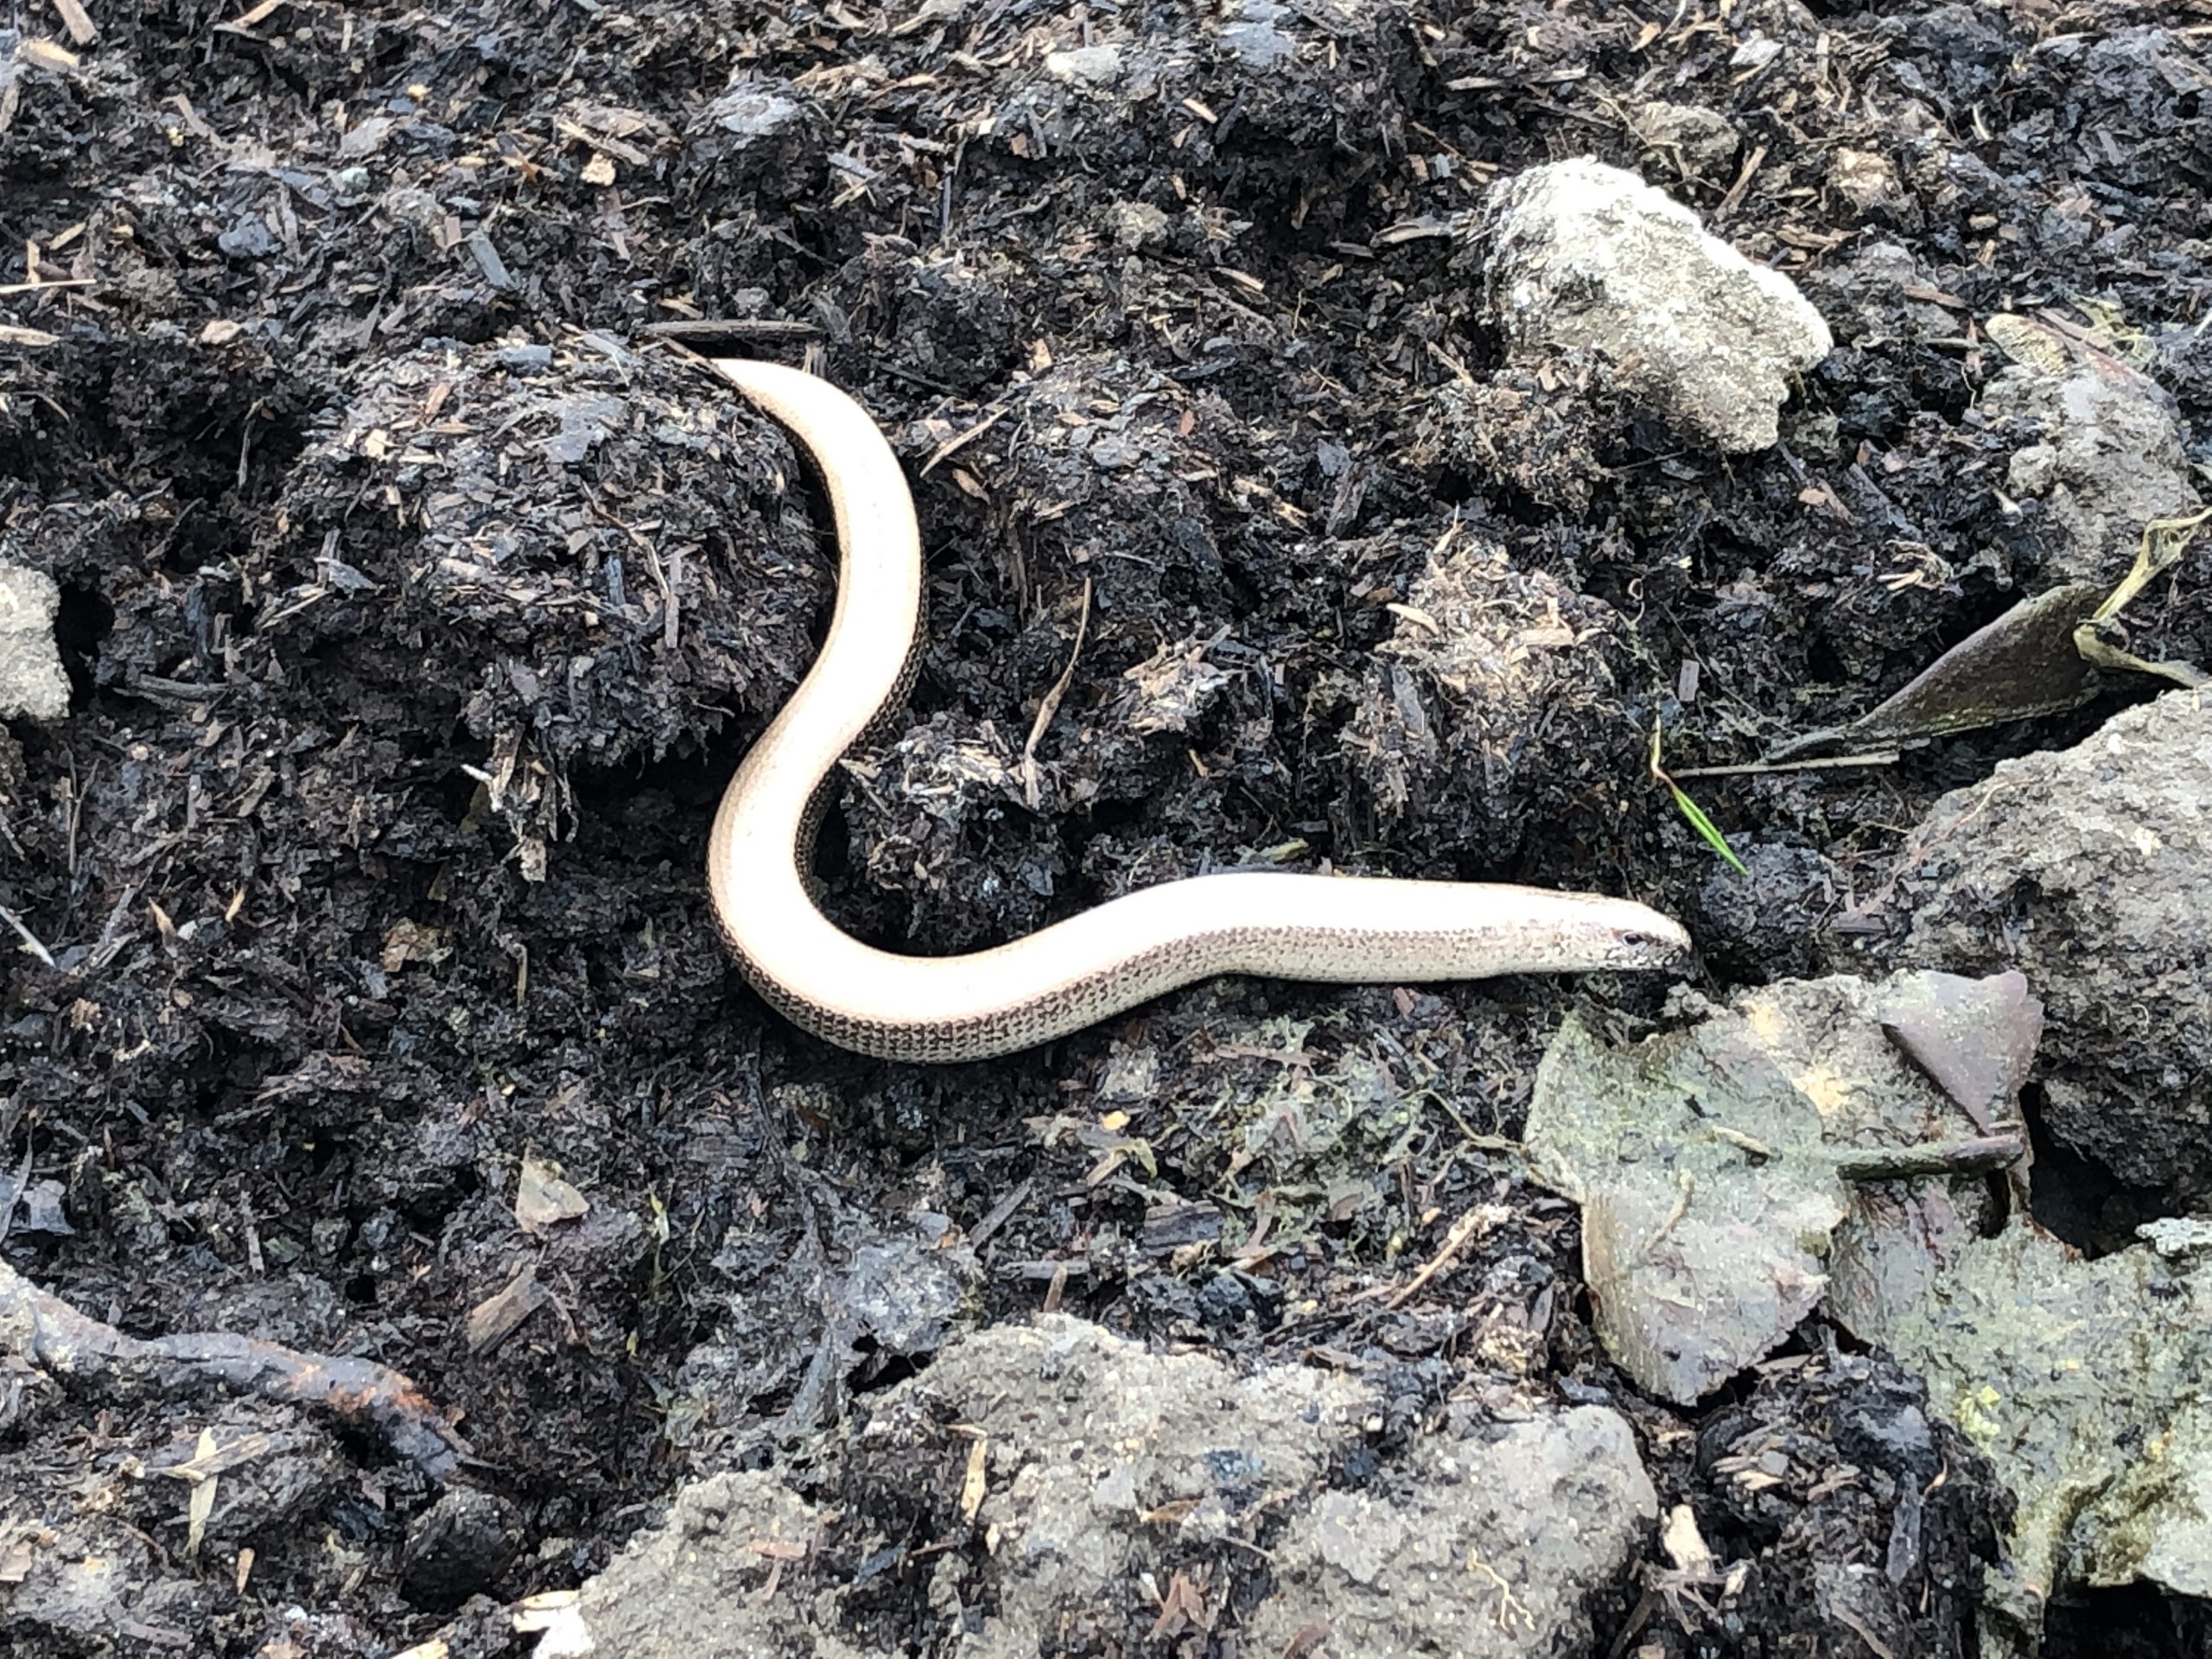 Slow worm on compost